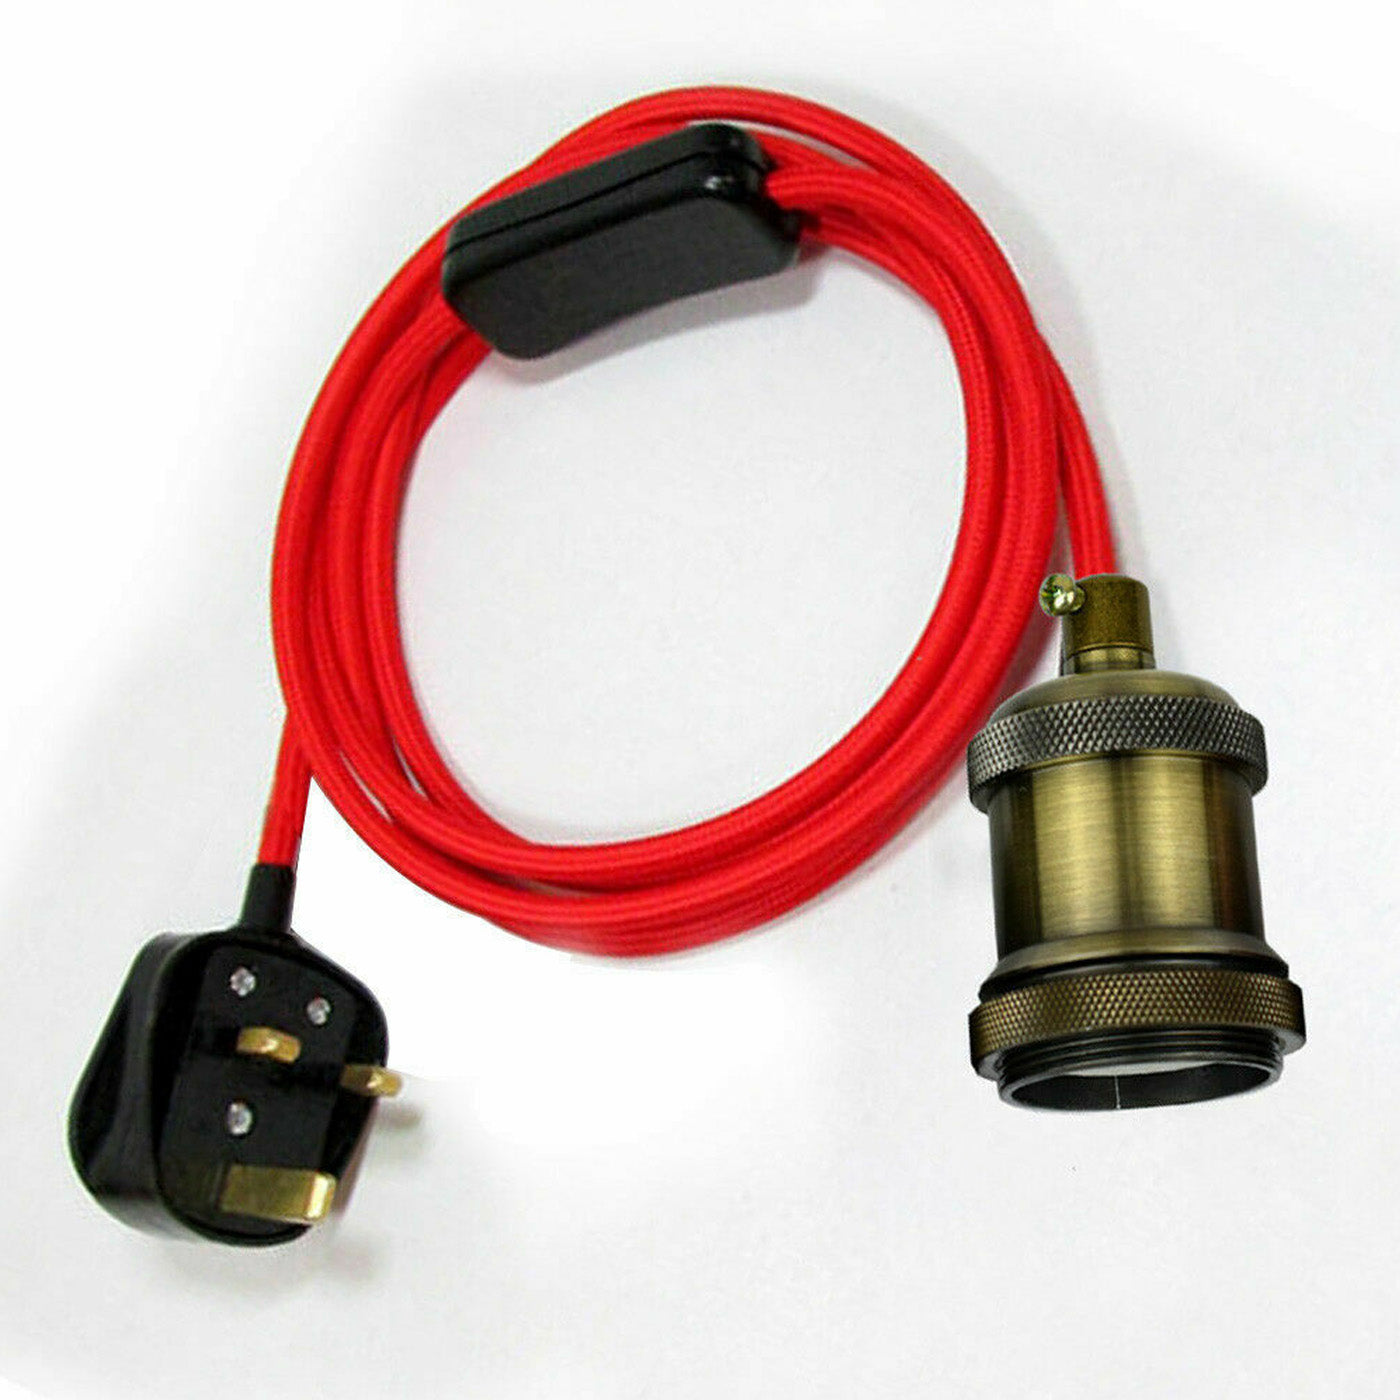 2m Plug In Pendant Set Flex Cable With Bulb Holder